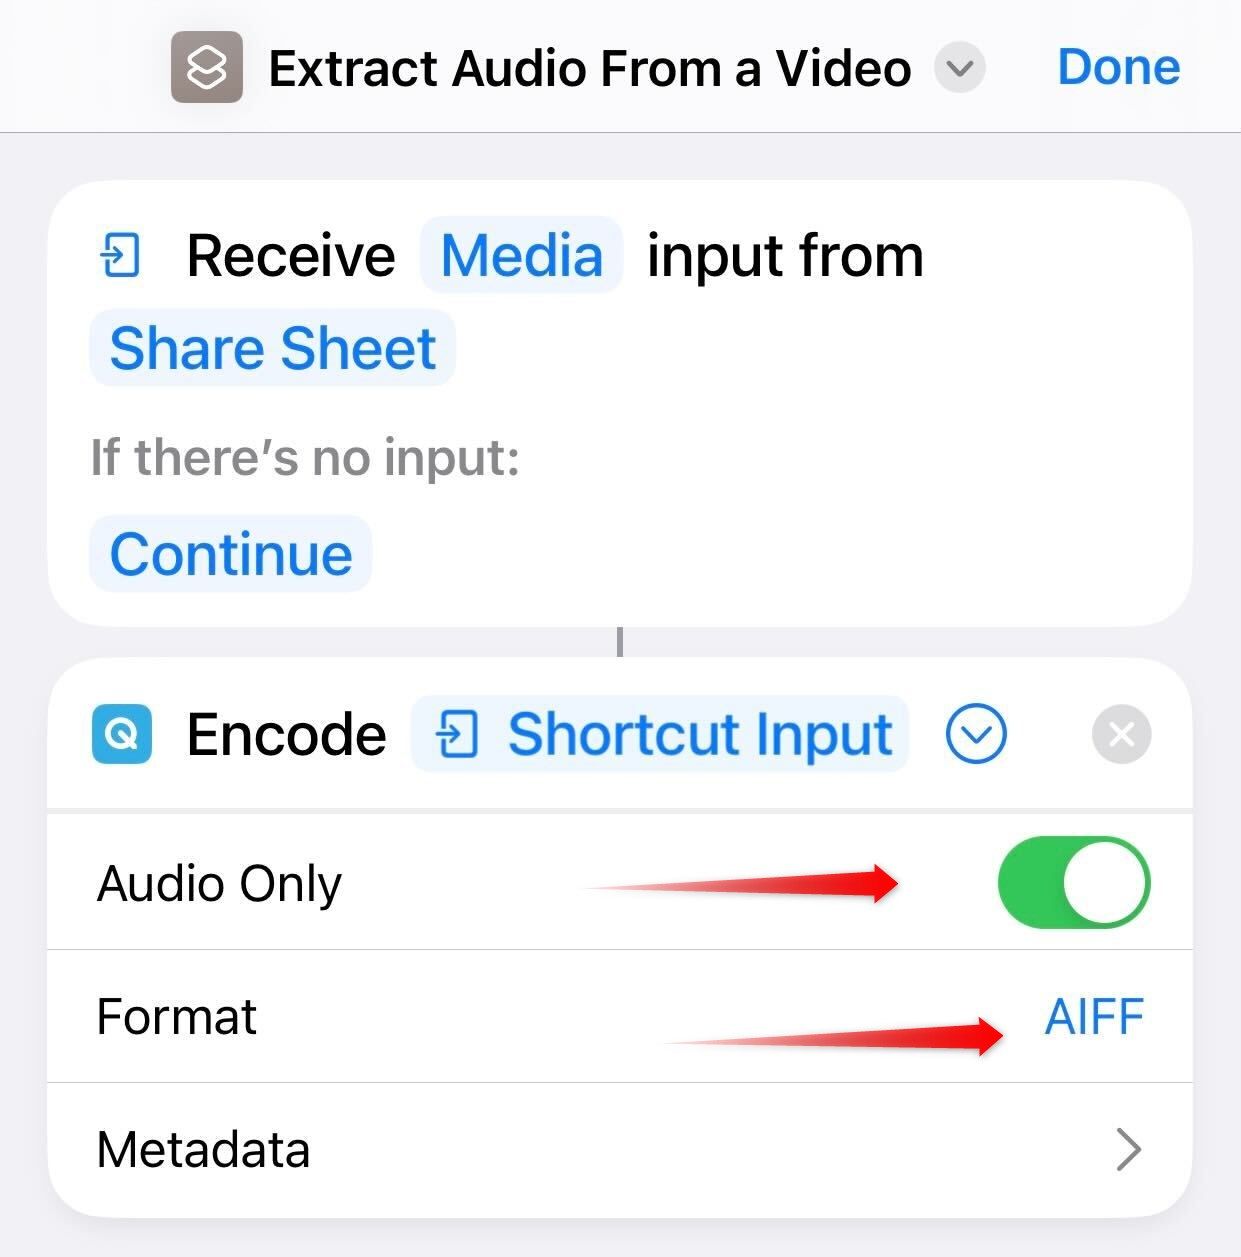 Customizing the action created for a shortcut on iPhone.